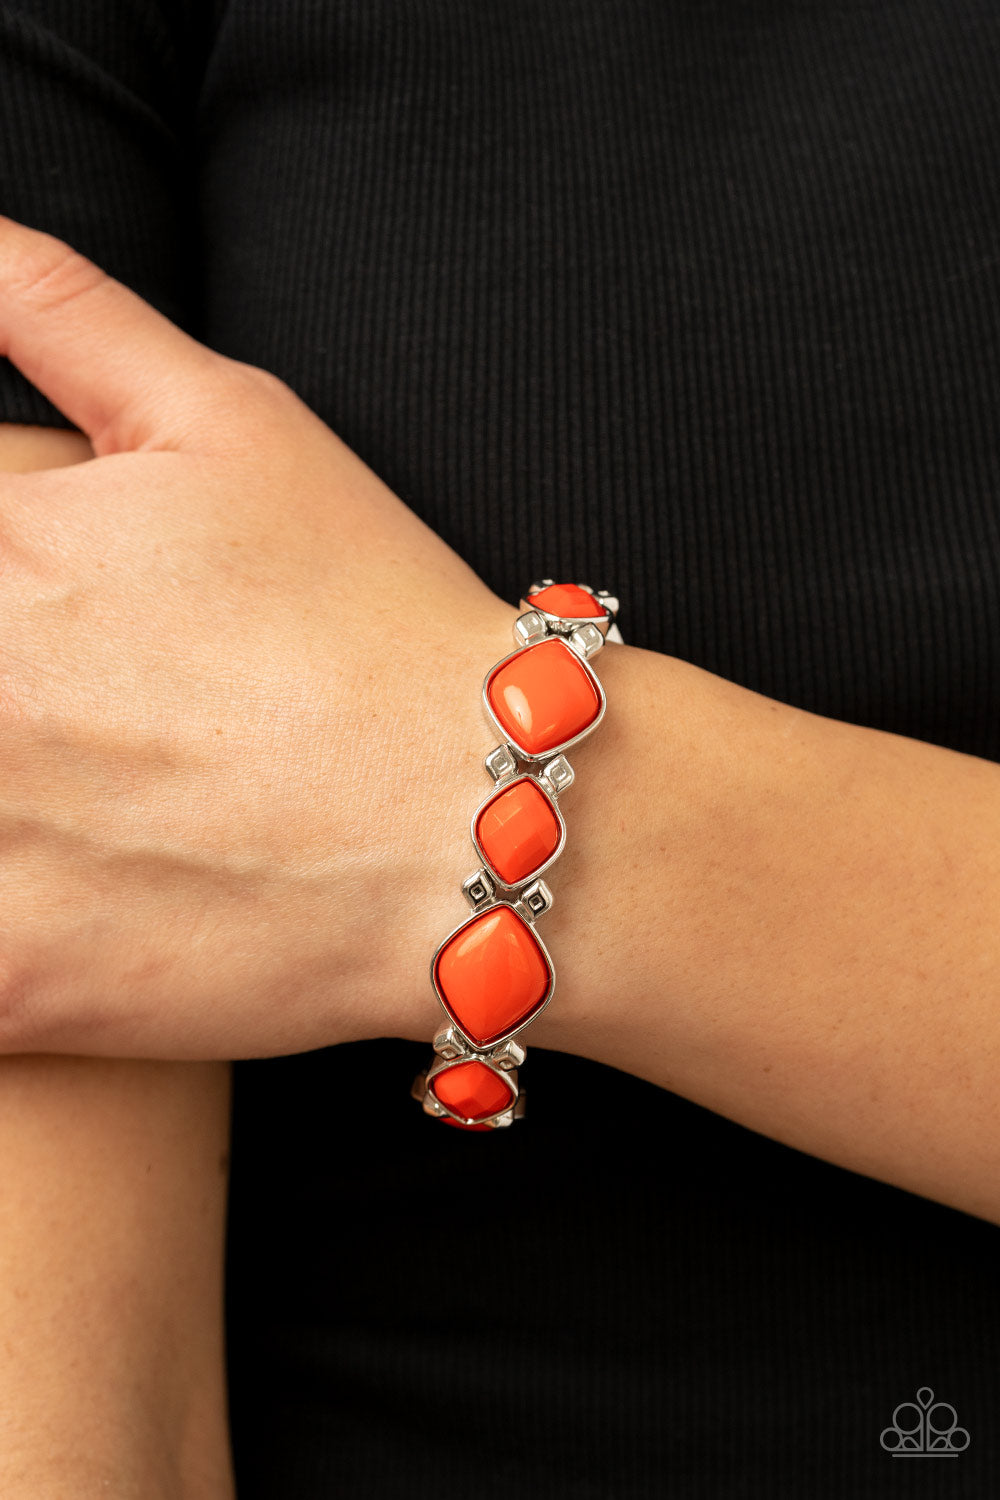 Boldly BEAD-azzled - Orange and Silver Bracelet - Paparazzi Accessories - Attached to silver diamond shaped beads, bubbly burnt orange diamond shaped beaded frames are threaded along stretchy bands around the wrist for a zesty pop of color. Sold as one individual bracelet.